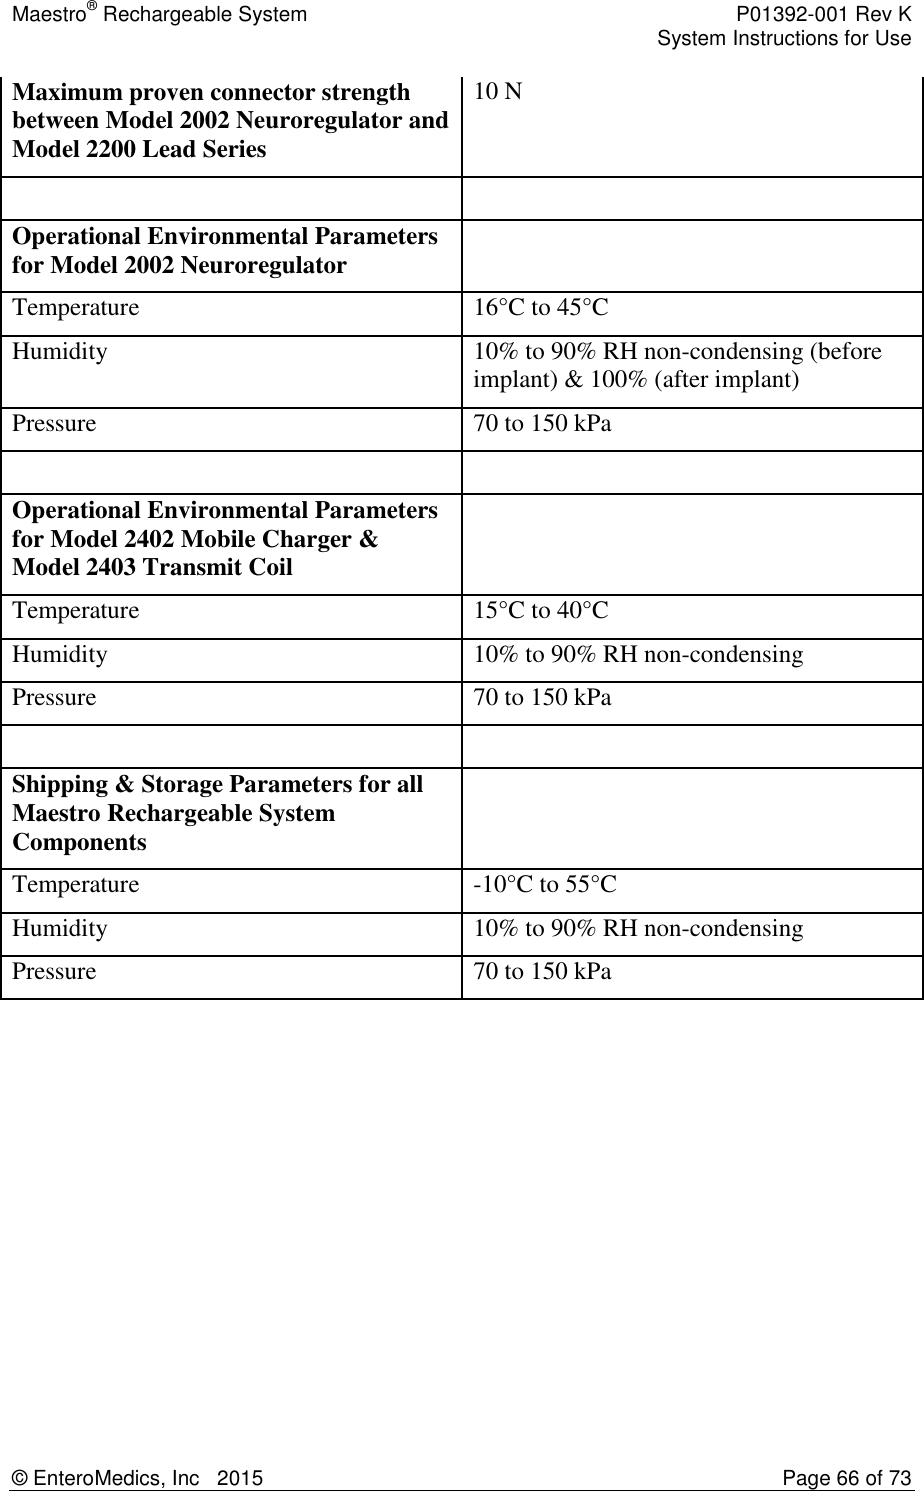 Maestro® Rechargeable System    P01392-001 Rev K     System Instructions for Use  © EnteroMedics, Inc   2015  Page 66 of 73  Maximum proven connector strength between Model 2002 Neuroregulator and Model 2200 Lead Series 10 N   Operational Environmental Parameters for Model 2002 Neuroregulator  Temperature 16°C to 45°C  Humidity 10% to 90% RH non-condensing (before implant) &amp; 100% (after implant) Pressure 70 to 150 kPa   Operational Environmental Parameters for Model 2402 Mobile Charger &amp; Model 2403 Transmit Coil  Temperature 15°C to 40°C  Humidity 10% to 90% RH non-condensing  Pressure 70 to 150 kPa   Shipping &amp; Storage Parameters for all Maestro Rechargeable System Components   Temperature -10°C to 55°C  Humidity 10% to 90% RH non-condensing  Pressure 70 to 150 kPa          